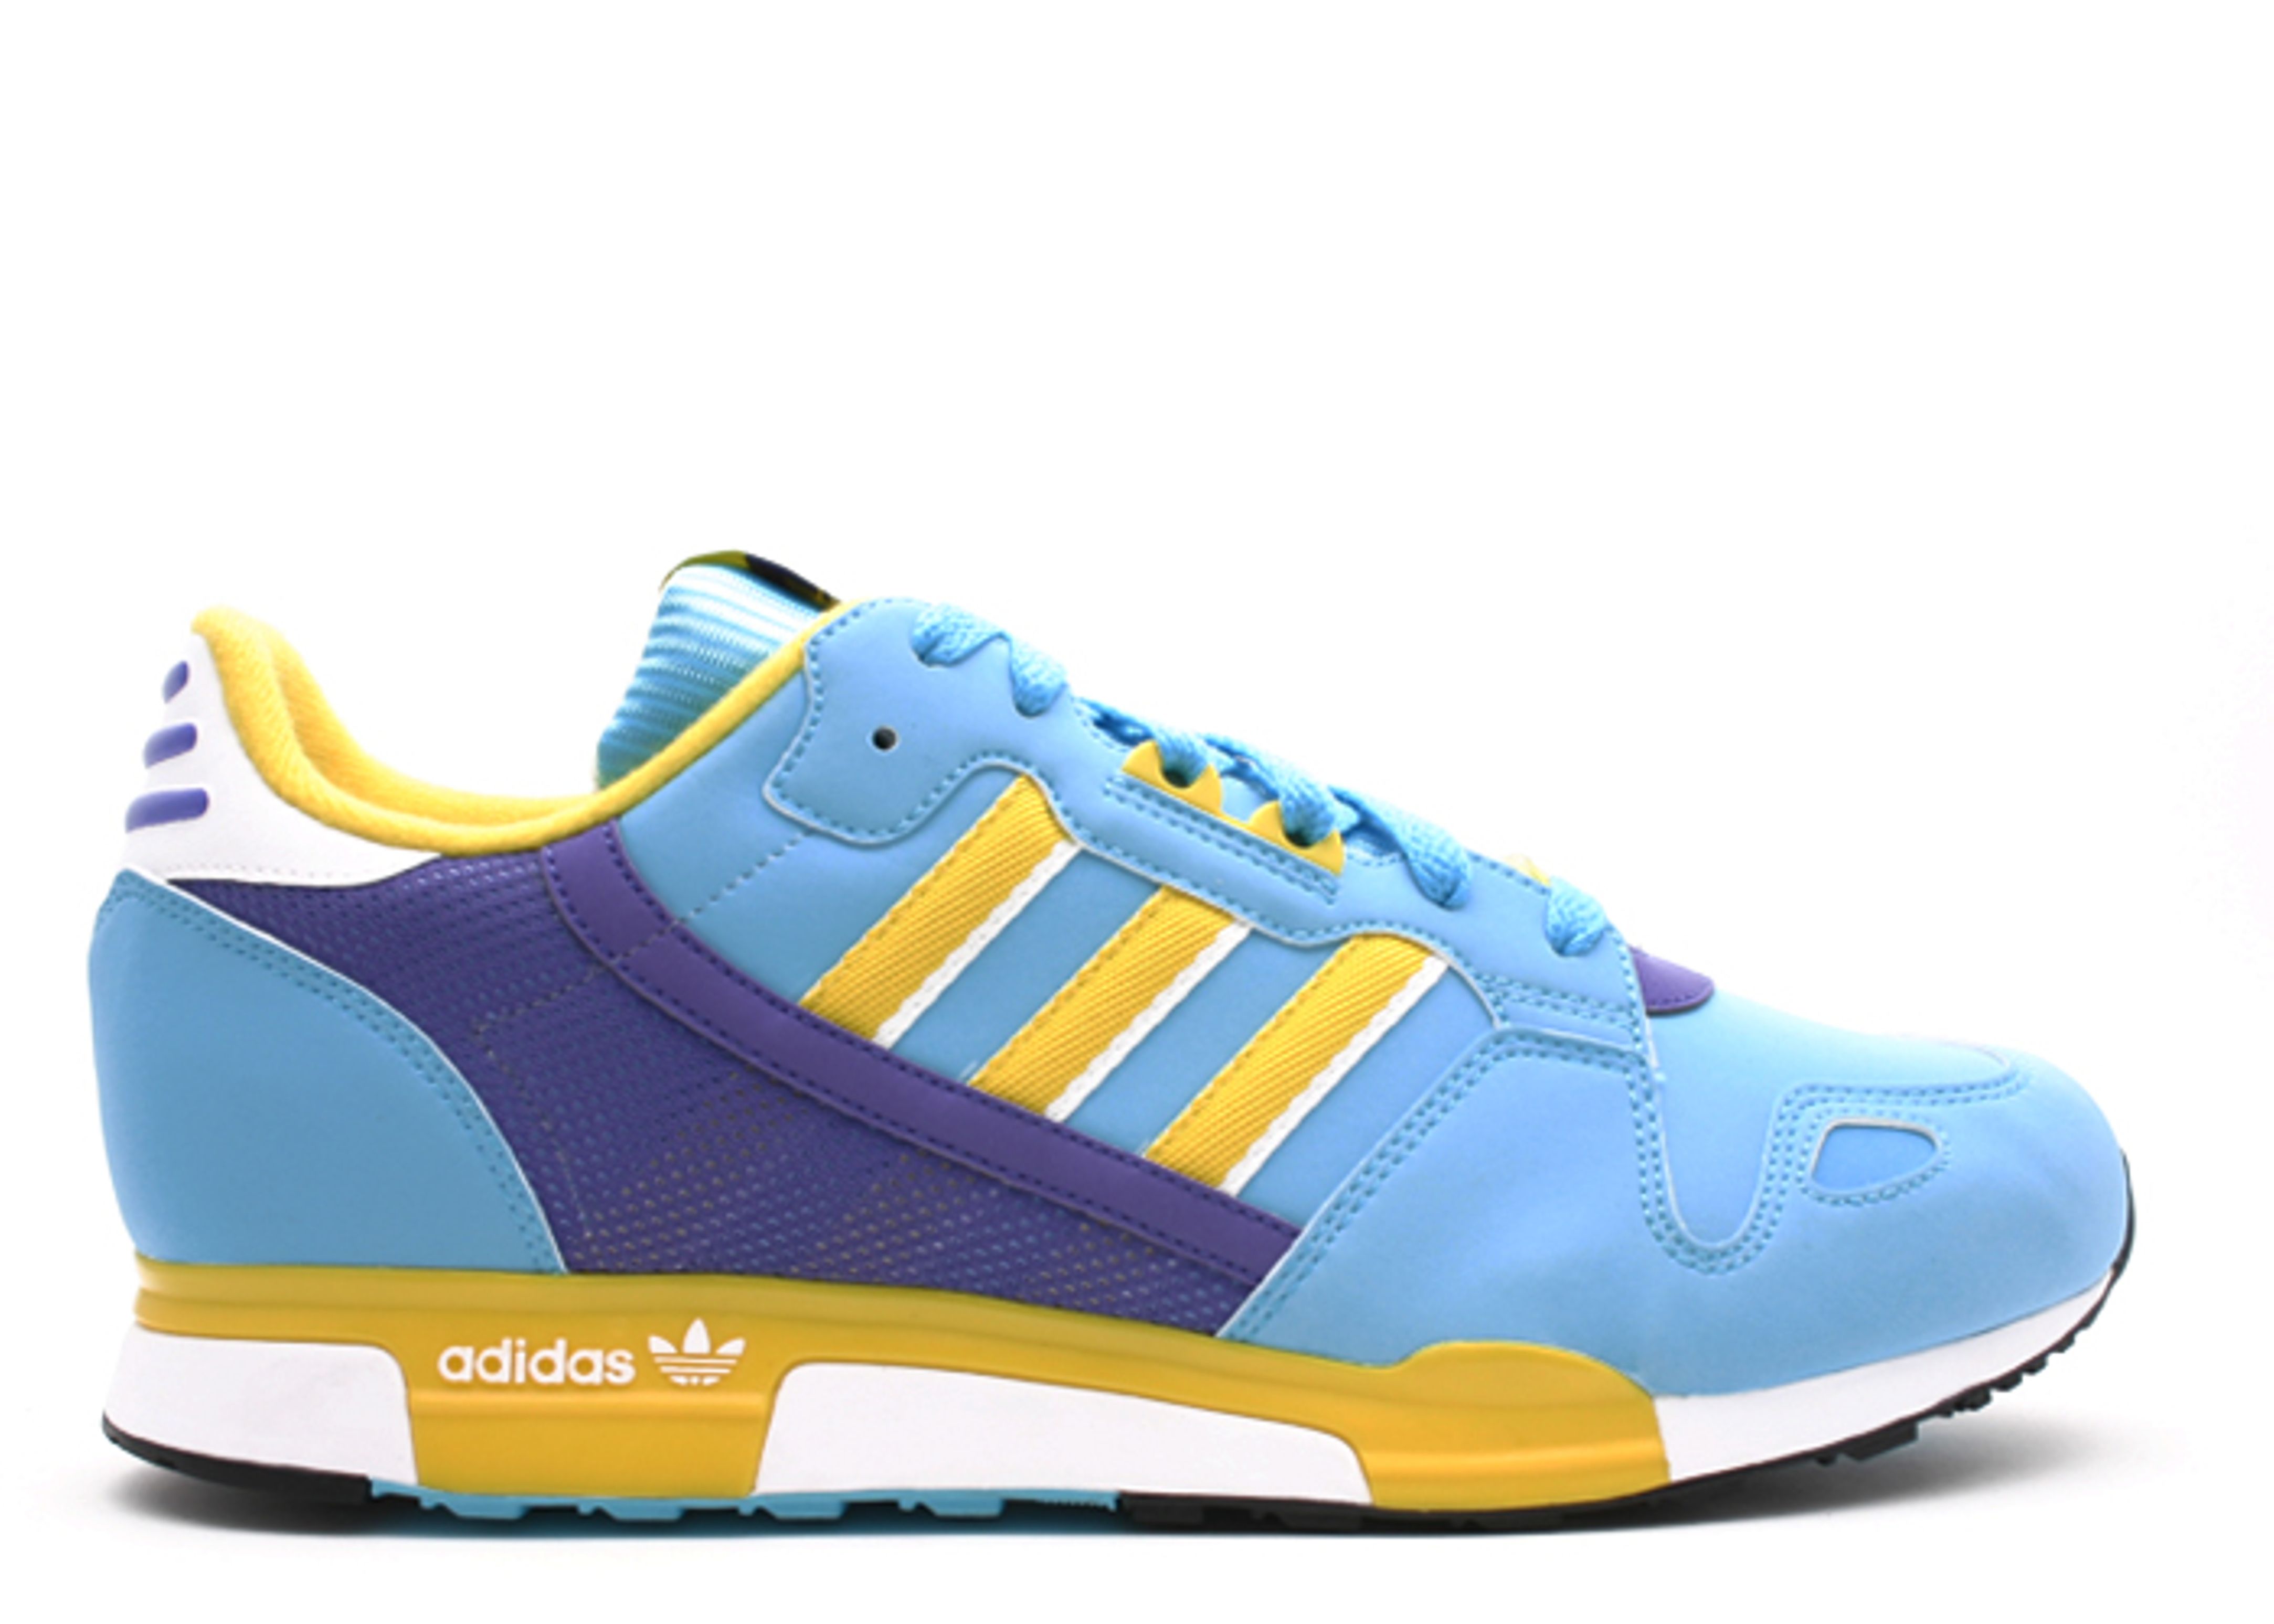 adidas zx 800 2014 homme